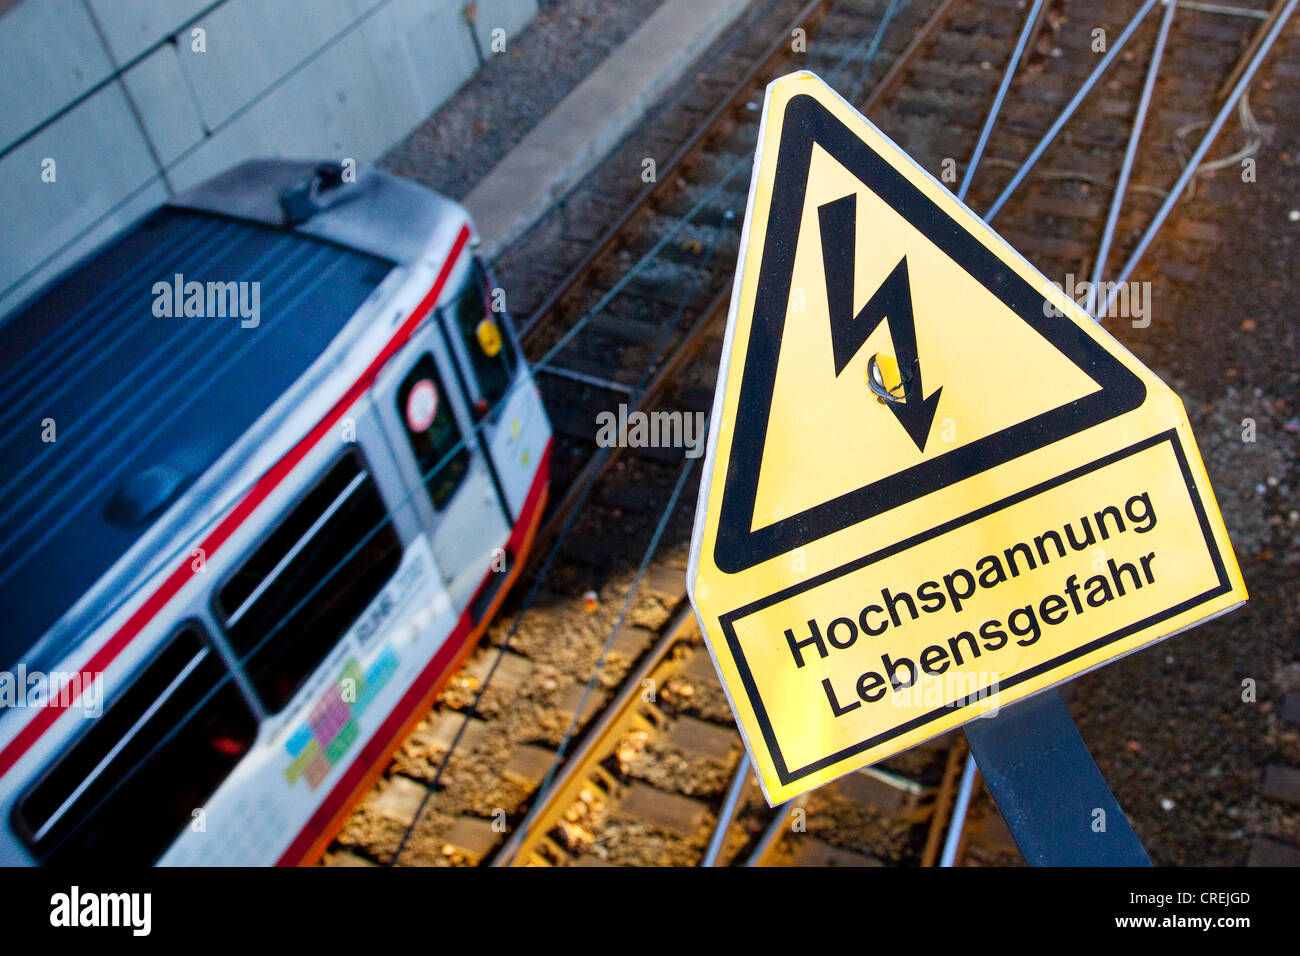 Sign, lettering 'Hochspannung Lebensgefahr', German for 'High voltage, danger of life', on a railway line of the suburban Stock Photo